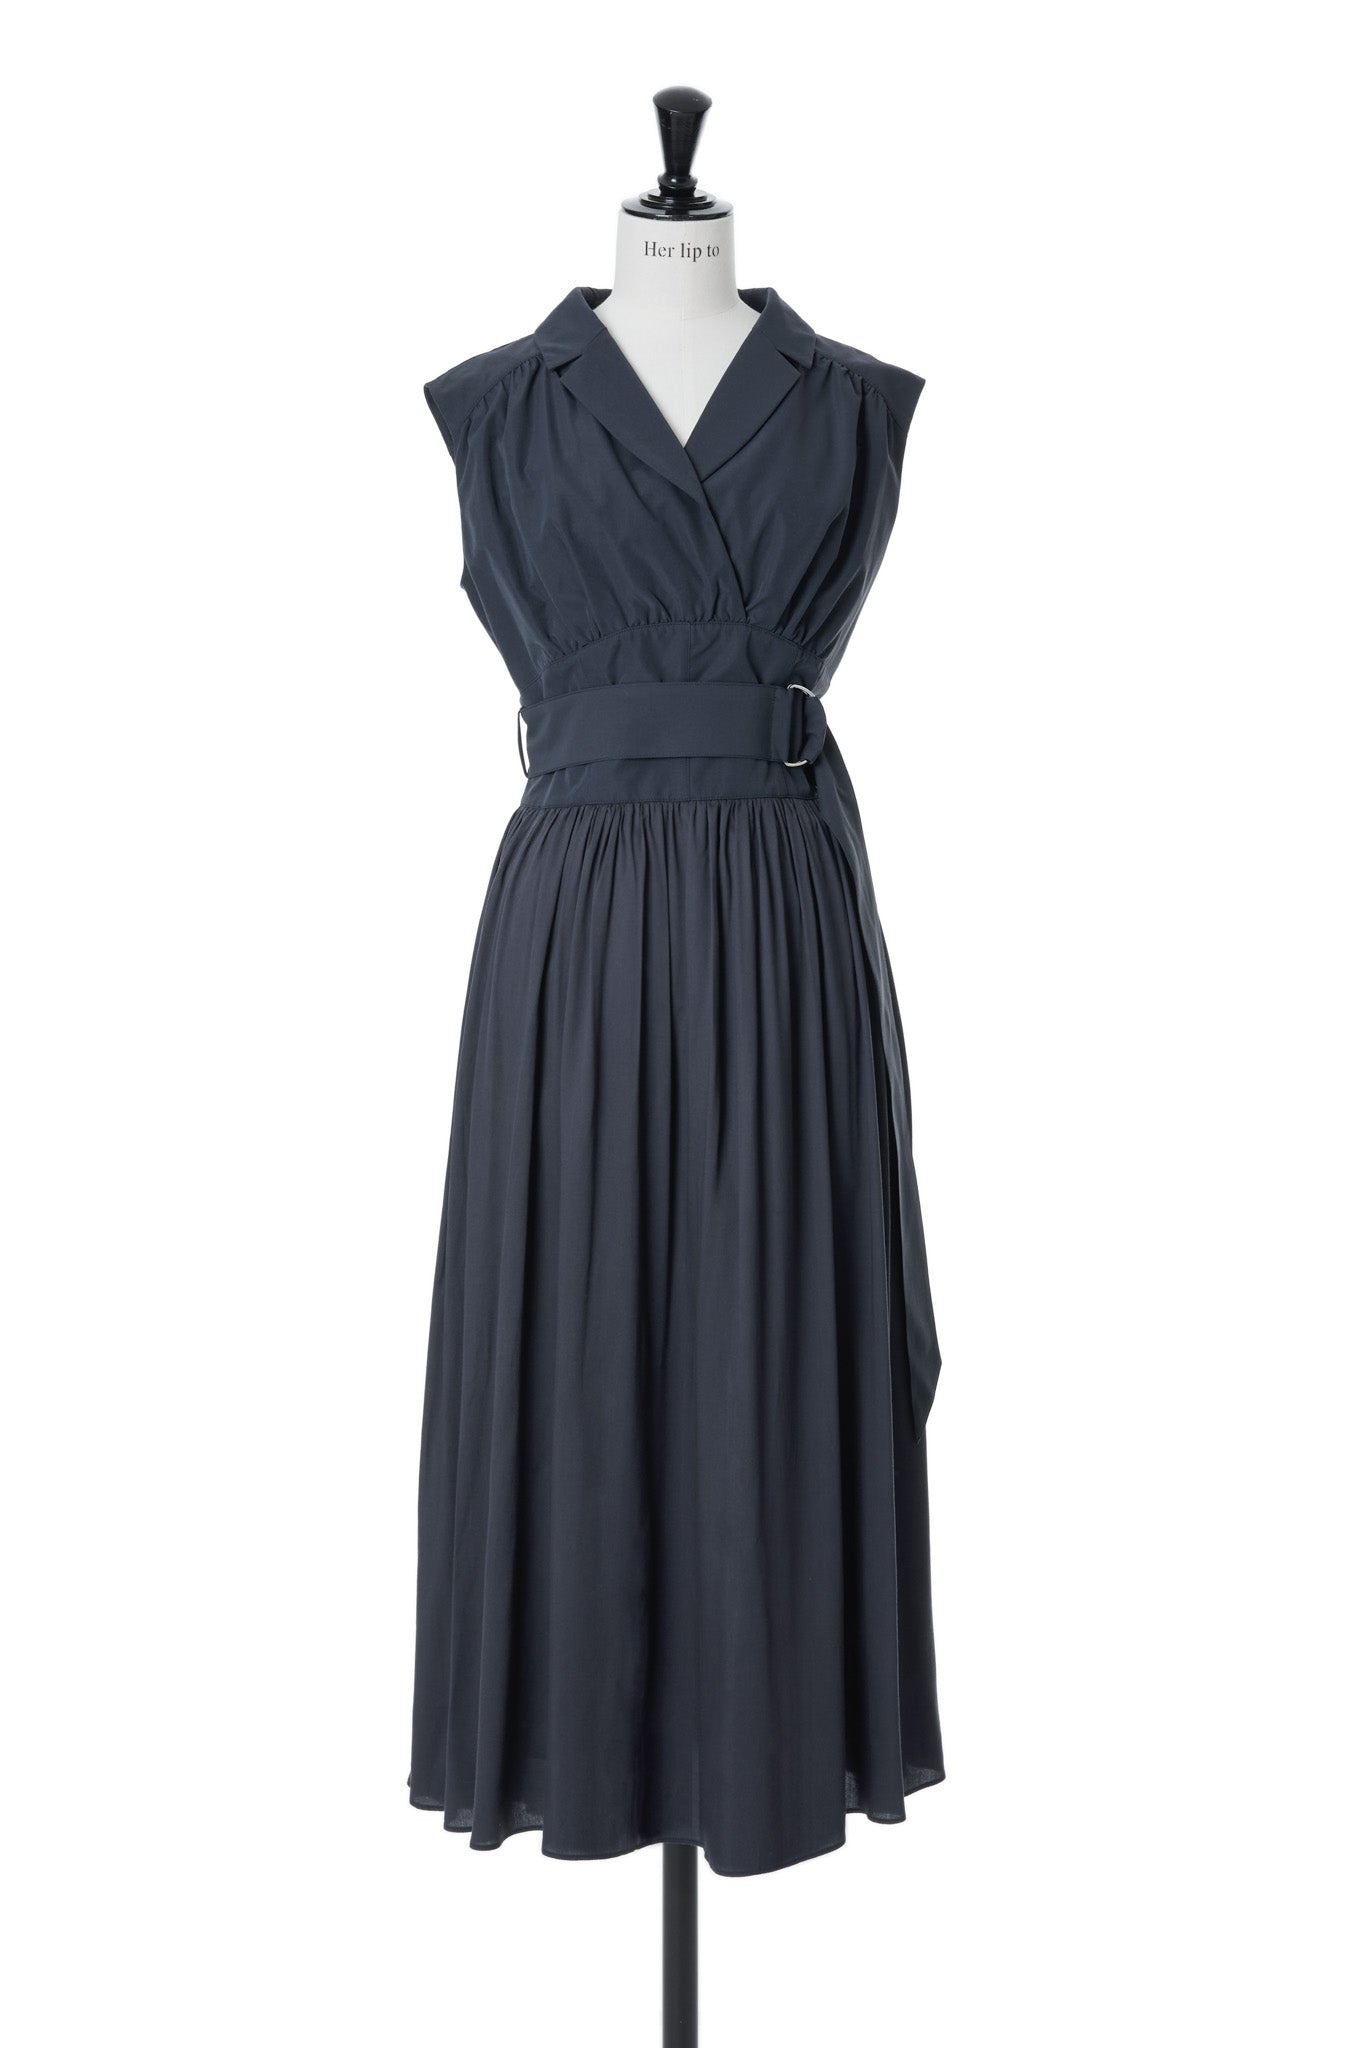 Classic Oxford Belted Dress herlipto